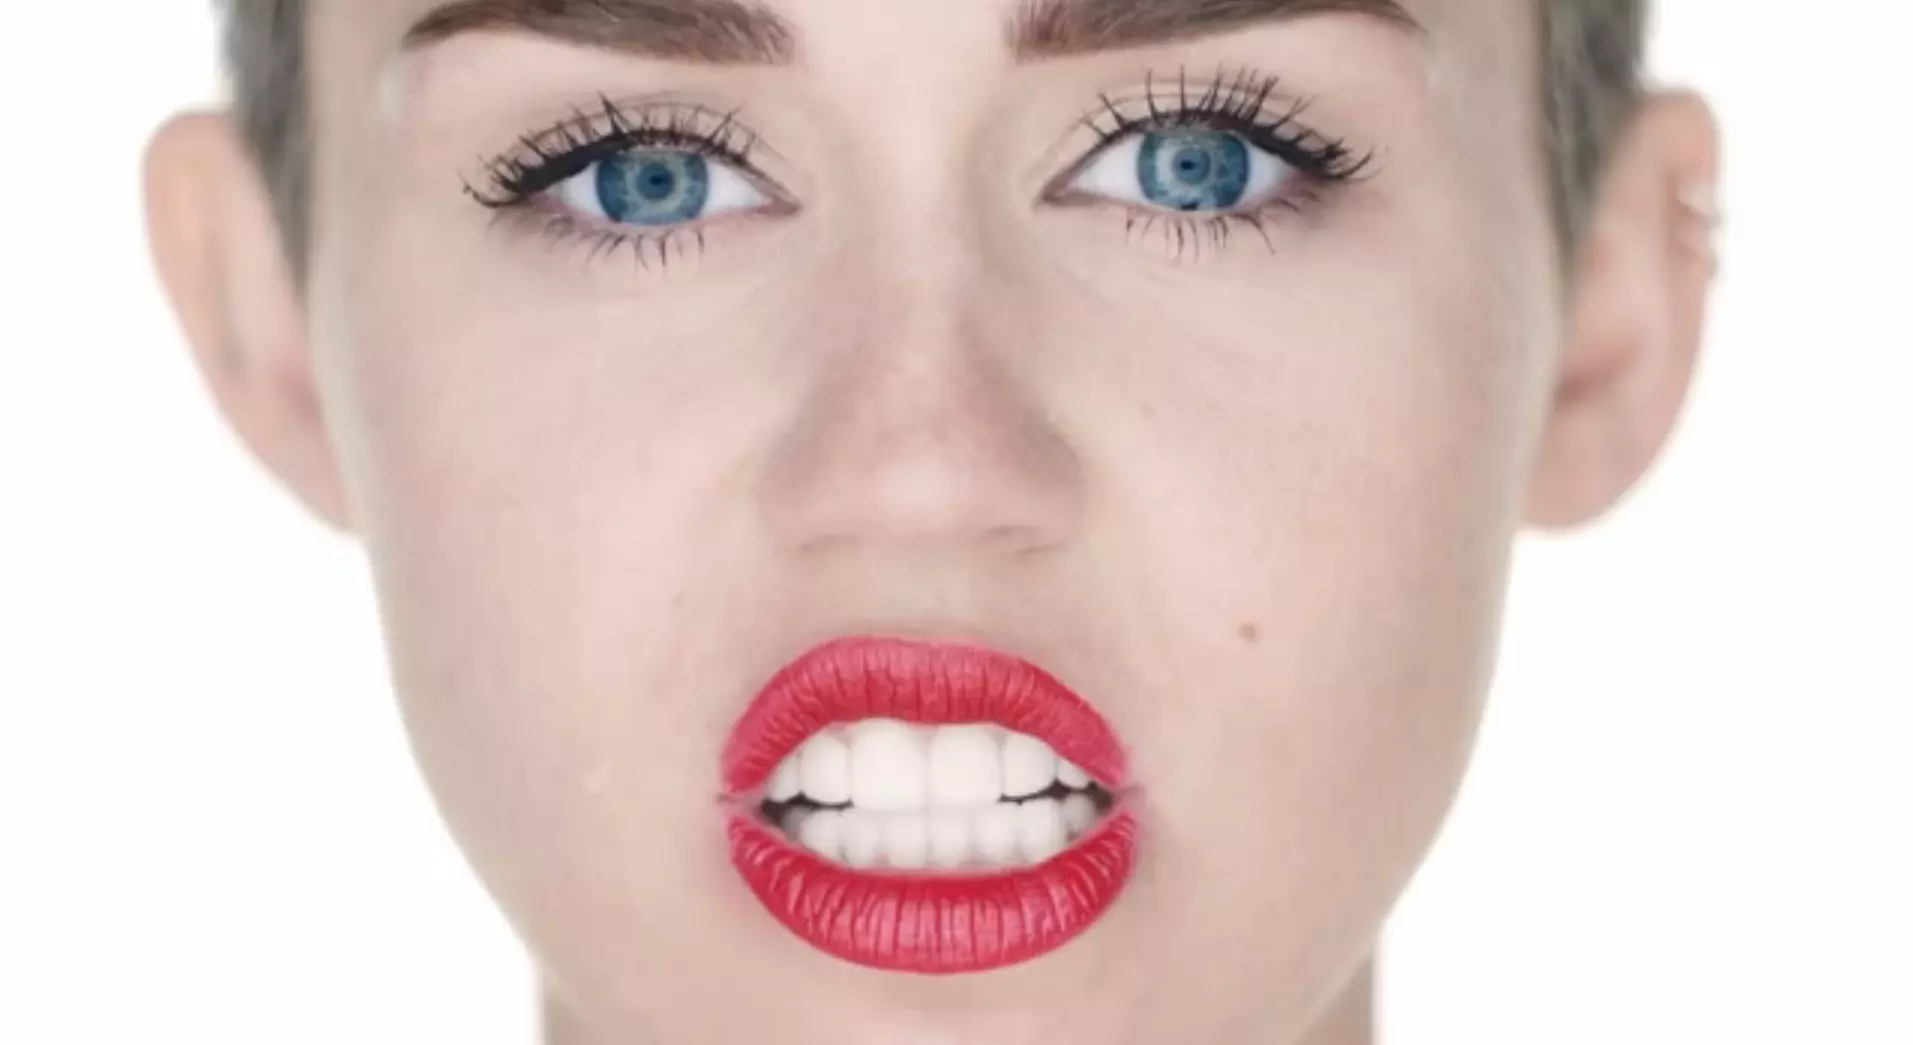 Miley Cyrus 'Adore You' Uncensored Music Video